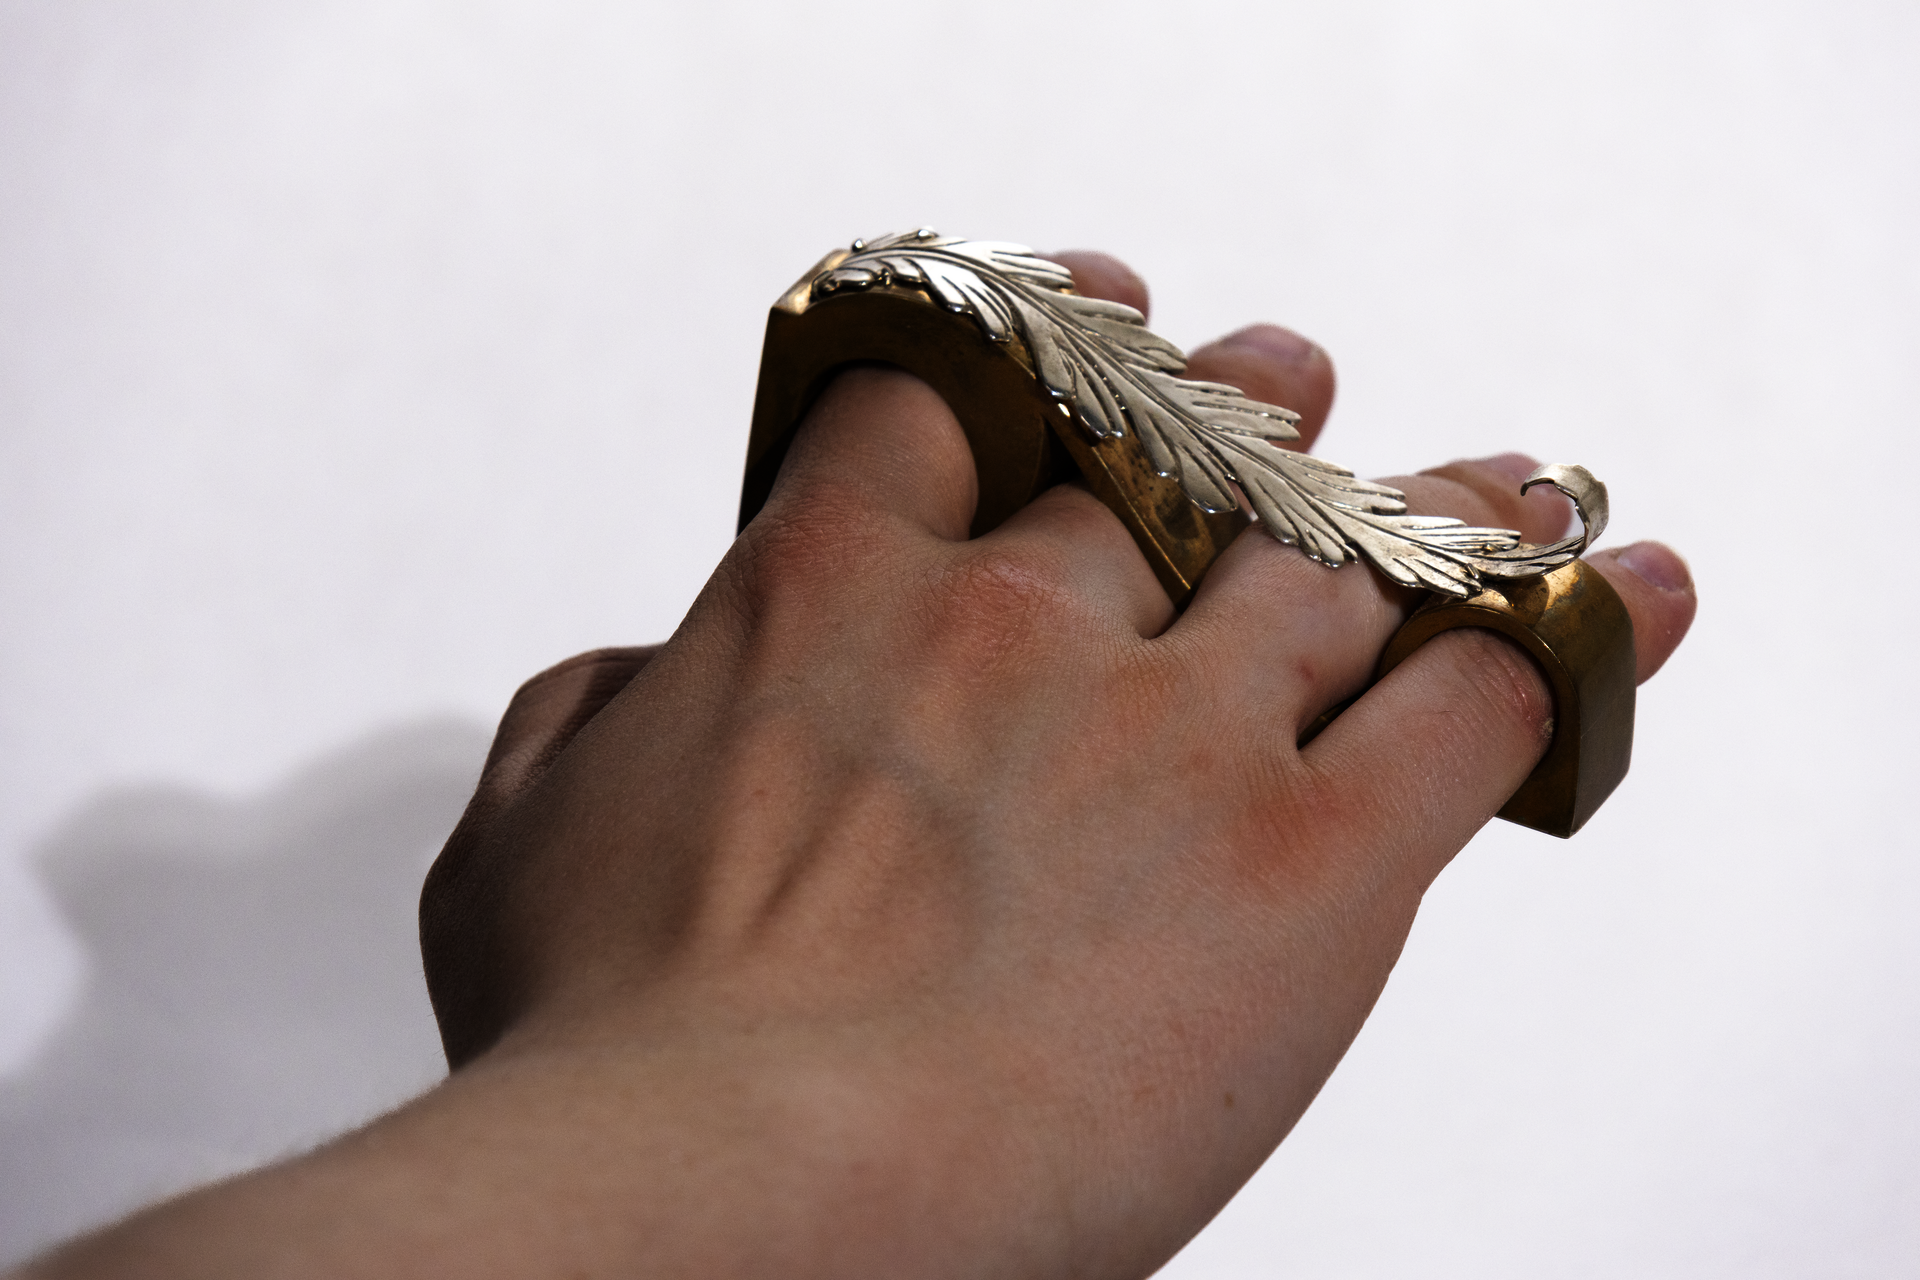 A hand reaching away from the viewer with a bronze ring that spans from the pointer to the pinky finger. The ring is capped with a curled silver acanthus leaf ornament.